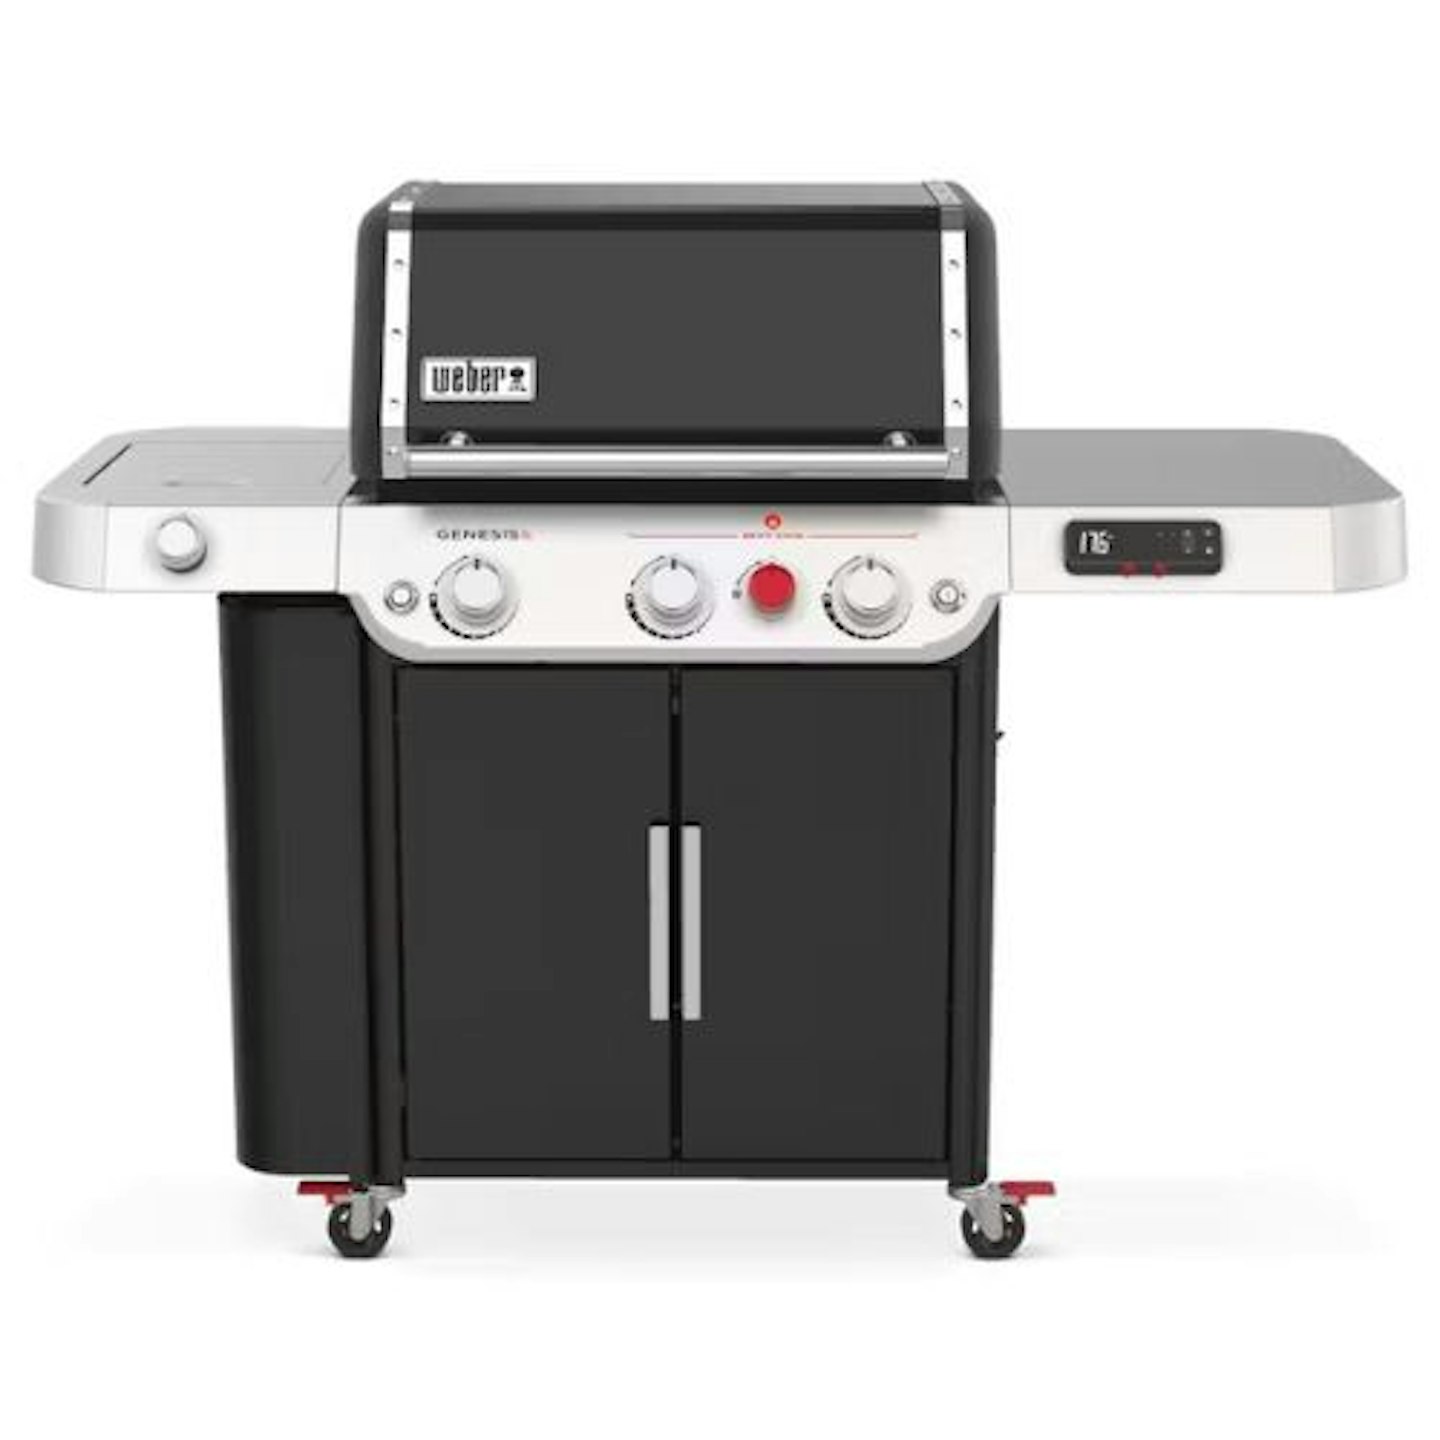 Genesis® EPX-335 Smart Gas Barbecue